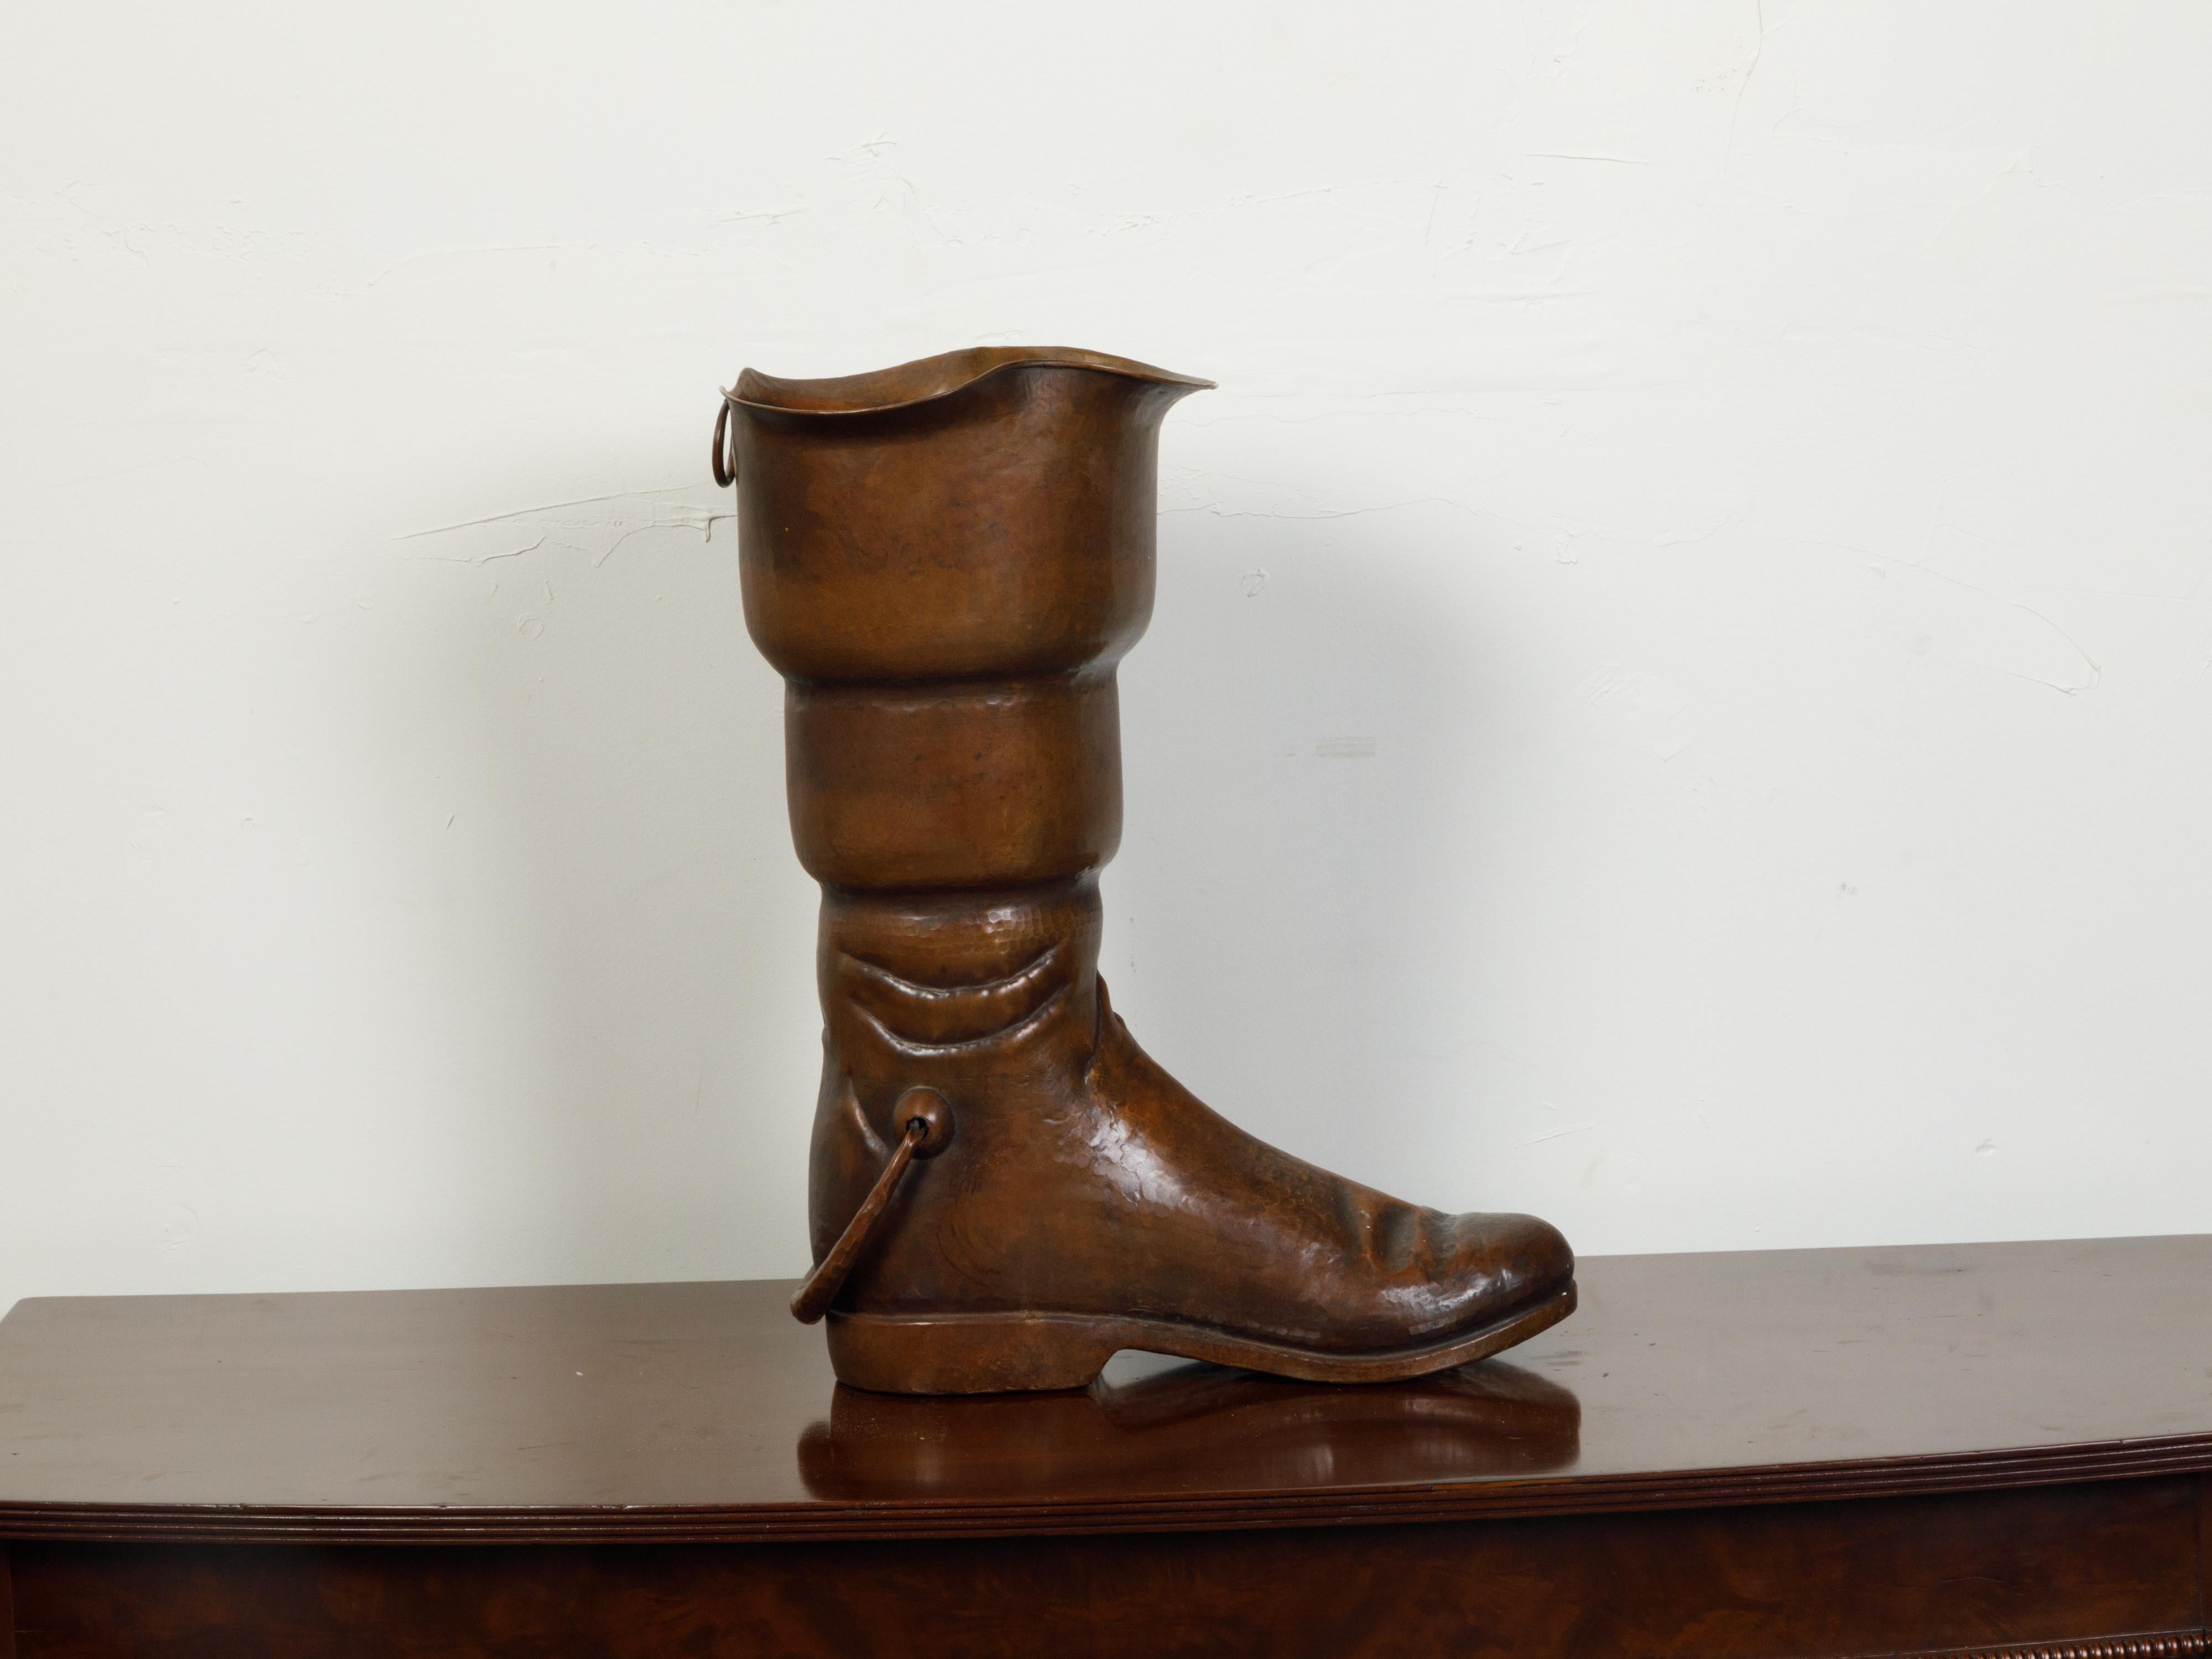 Vintage English Midcentury Copper Umbrella Stand Depicting a Boot For Sale 2